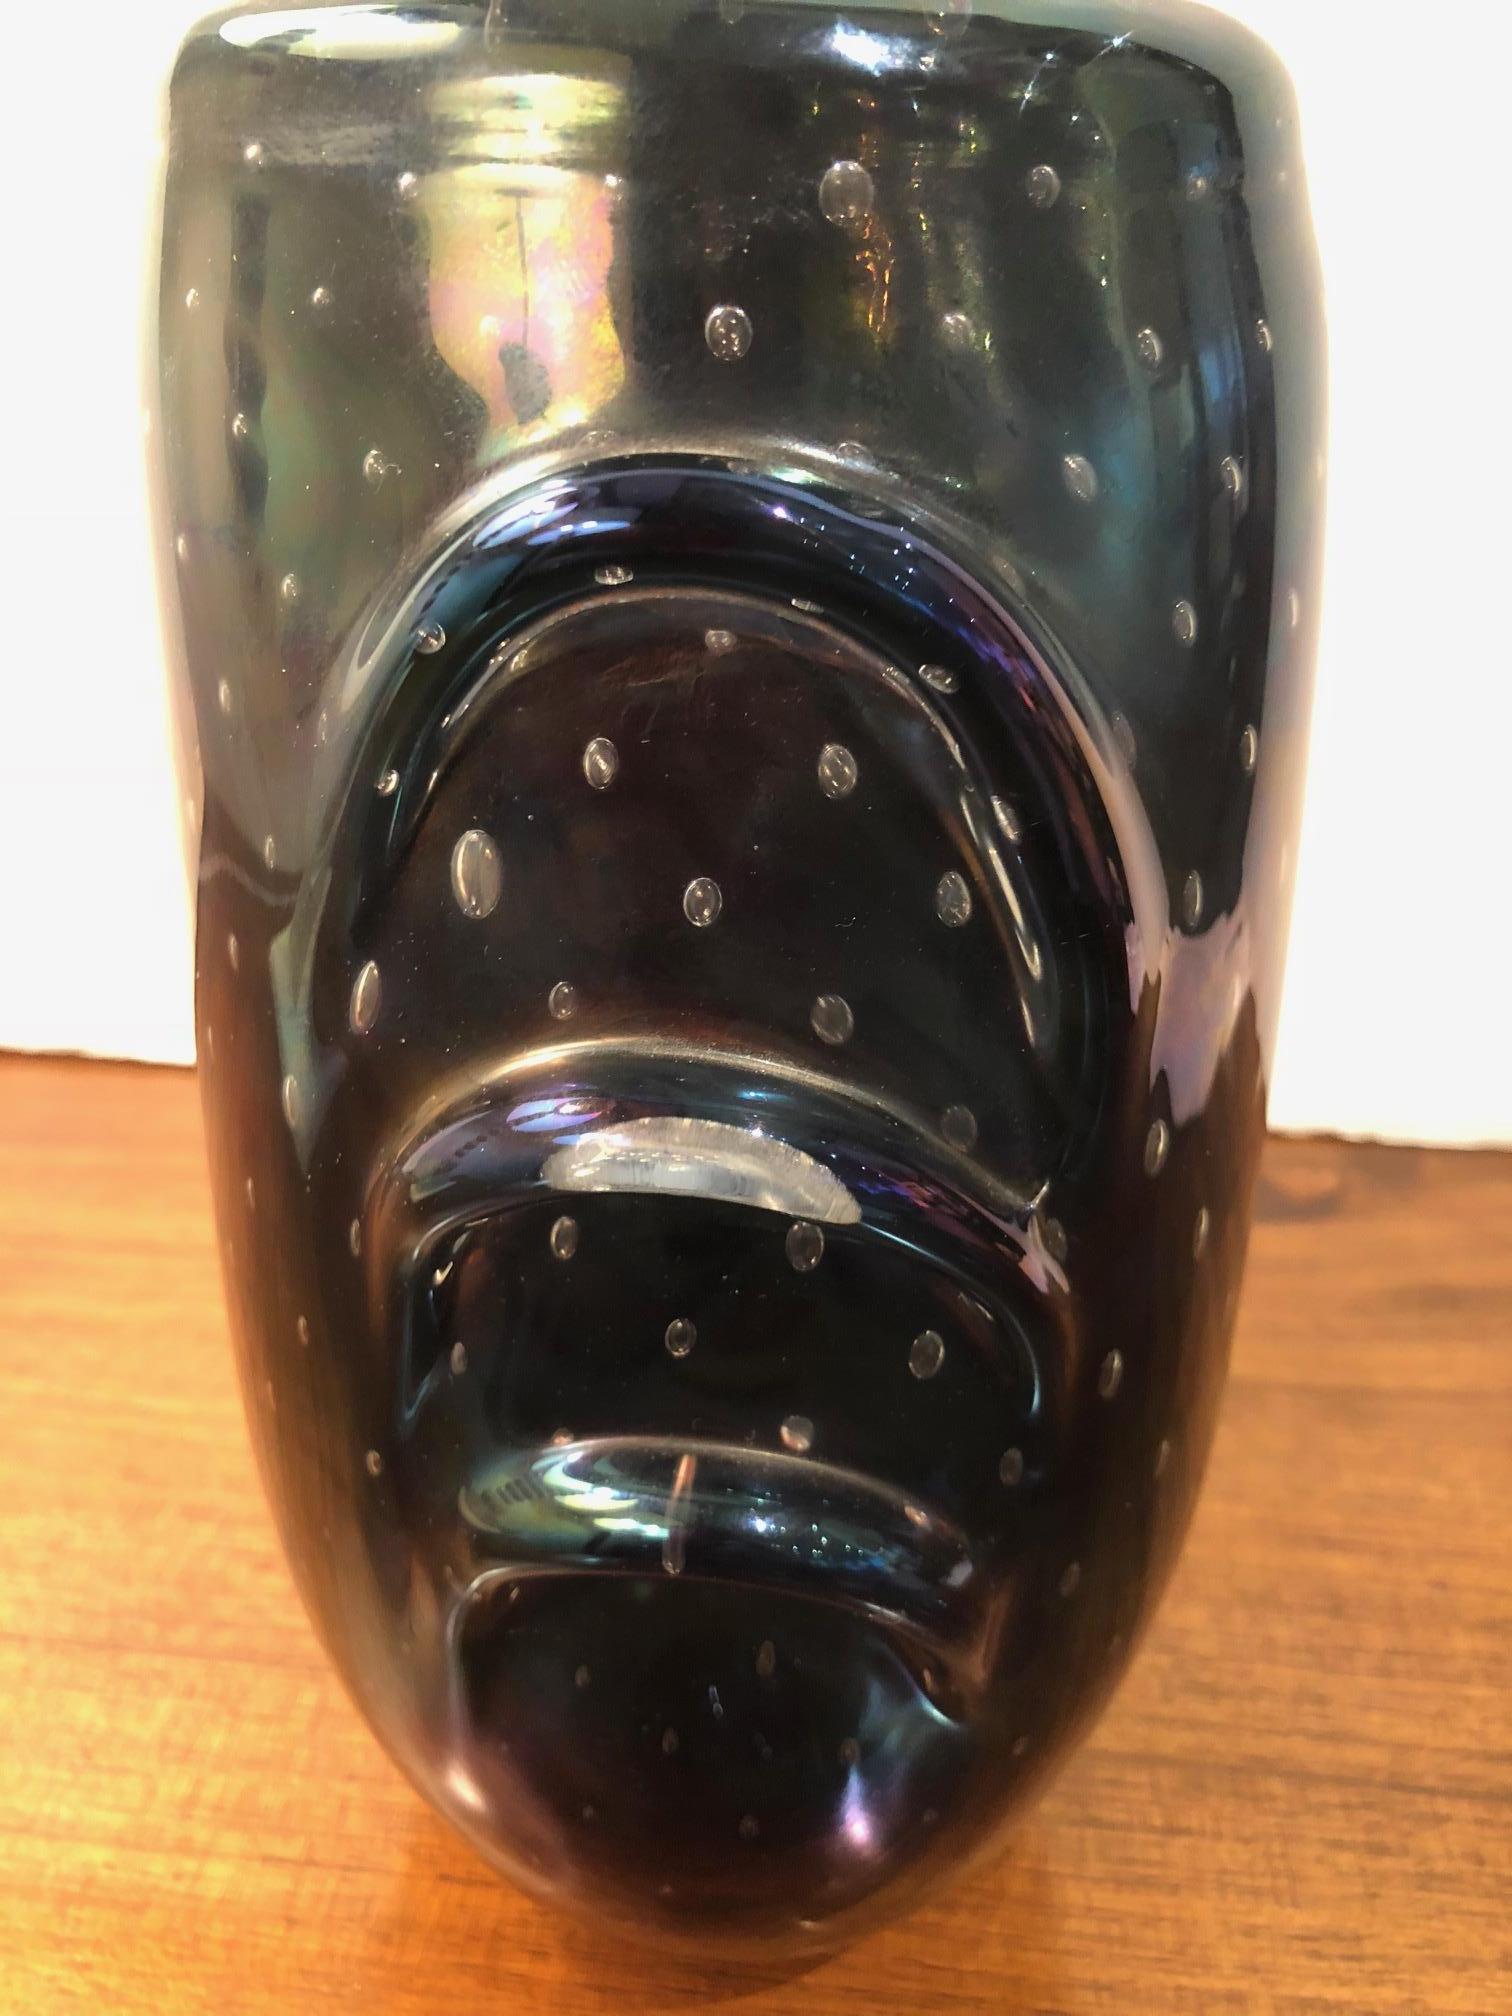 Iridescent Murano glass vase with imbedded bubbles in dark blue and purple.

Available to see in our NYC Showroom 
BK Antiques
306 East 61st St. 2nd fl.
New York, NY 10065